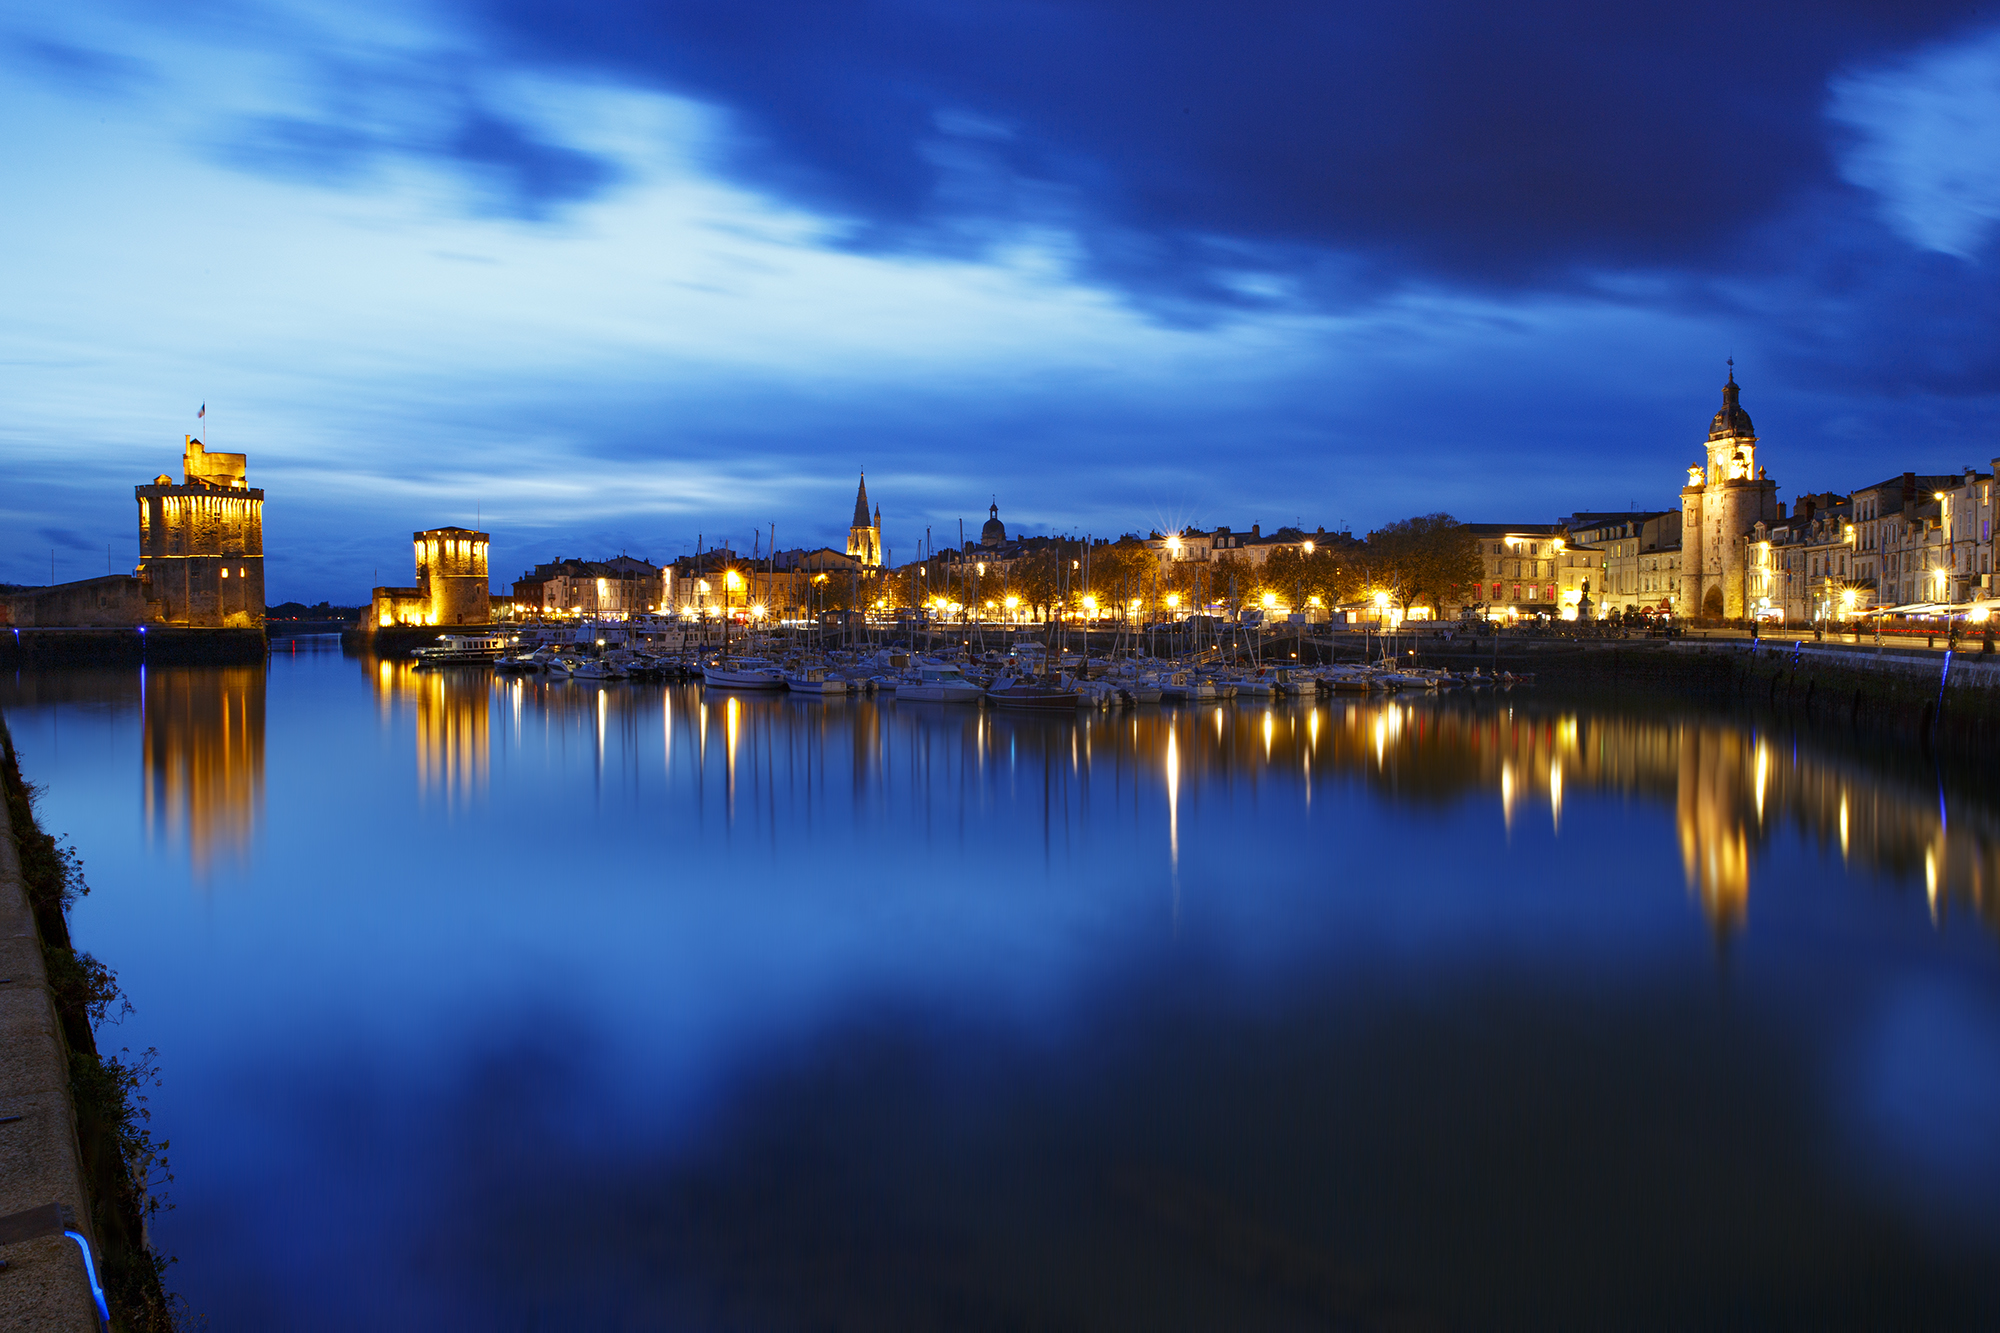 The city of La Rochelle in France, during the blue hour, view of the port with the towers of the entrance to the marina. Buildings, restaurants and hotels with illuminated facades. November 2022.